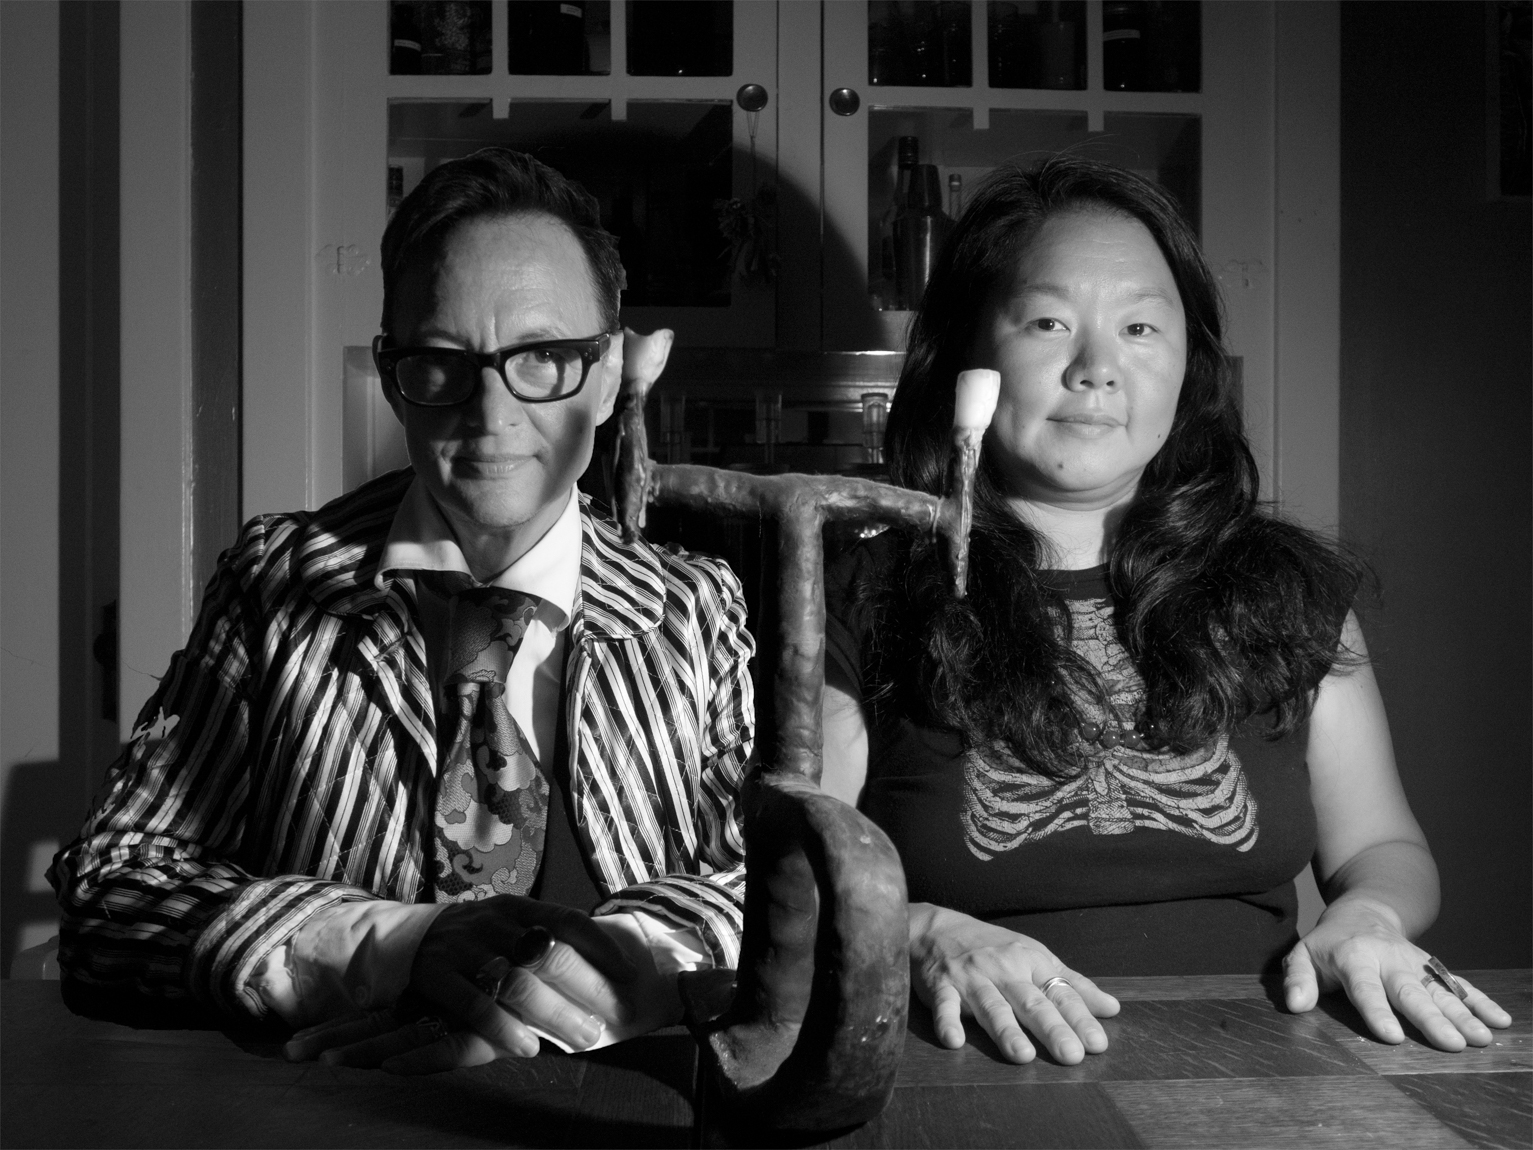 A black and white photograph of Asher Hartman and Haruko Tanaka seated at a table and looking into the camera.